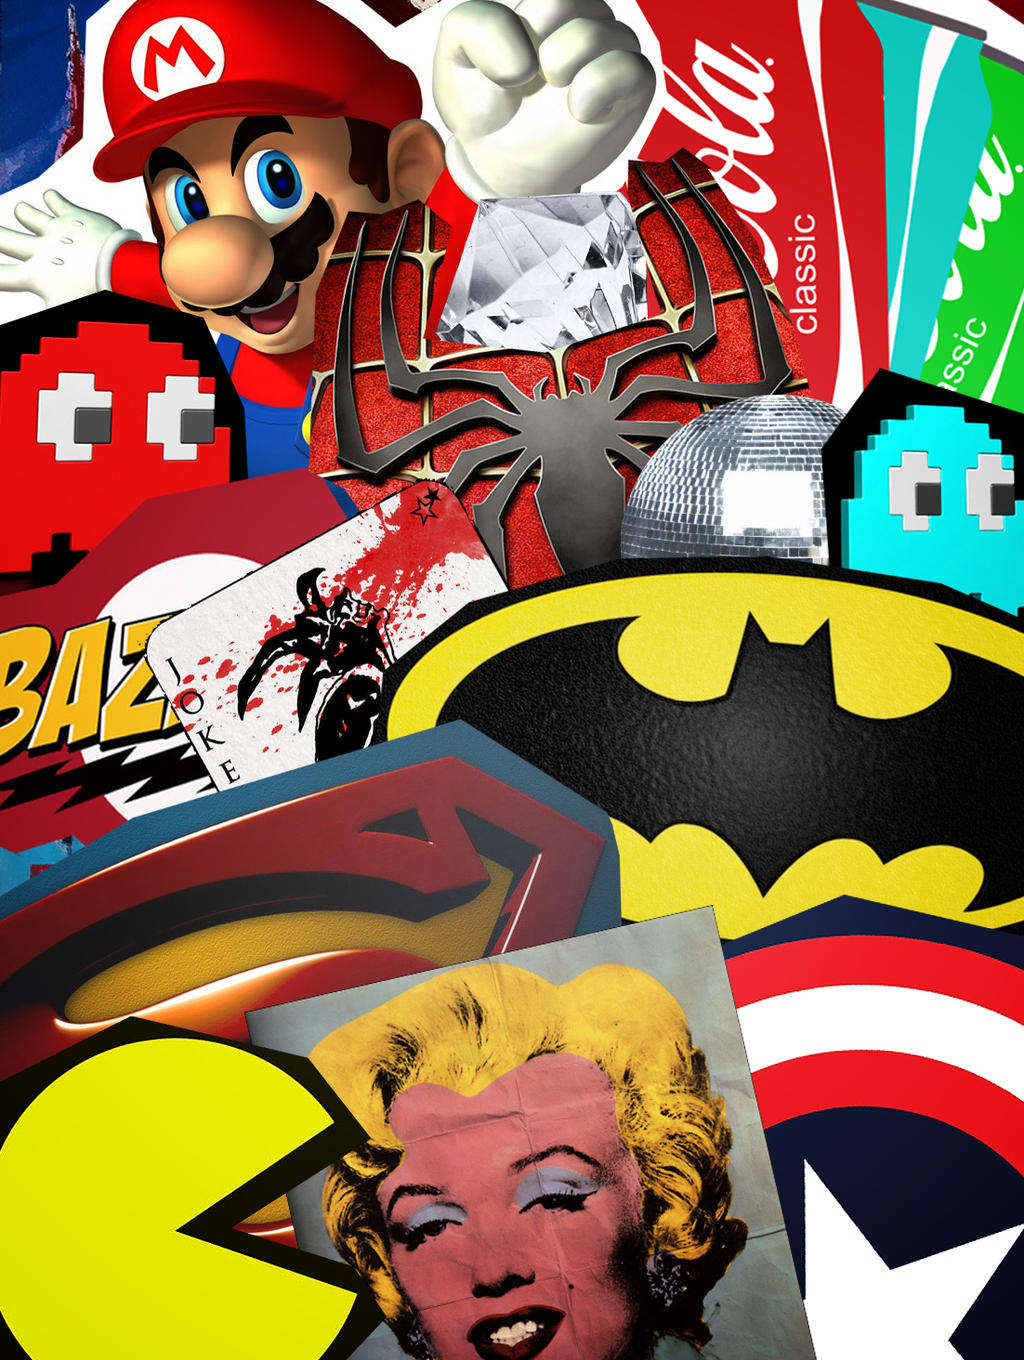 Download this Pop Culture Banner Popreaper picture